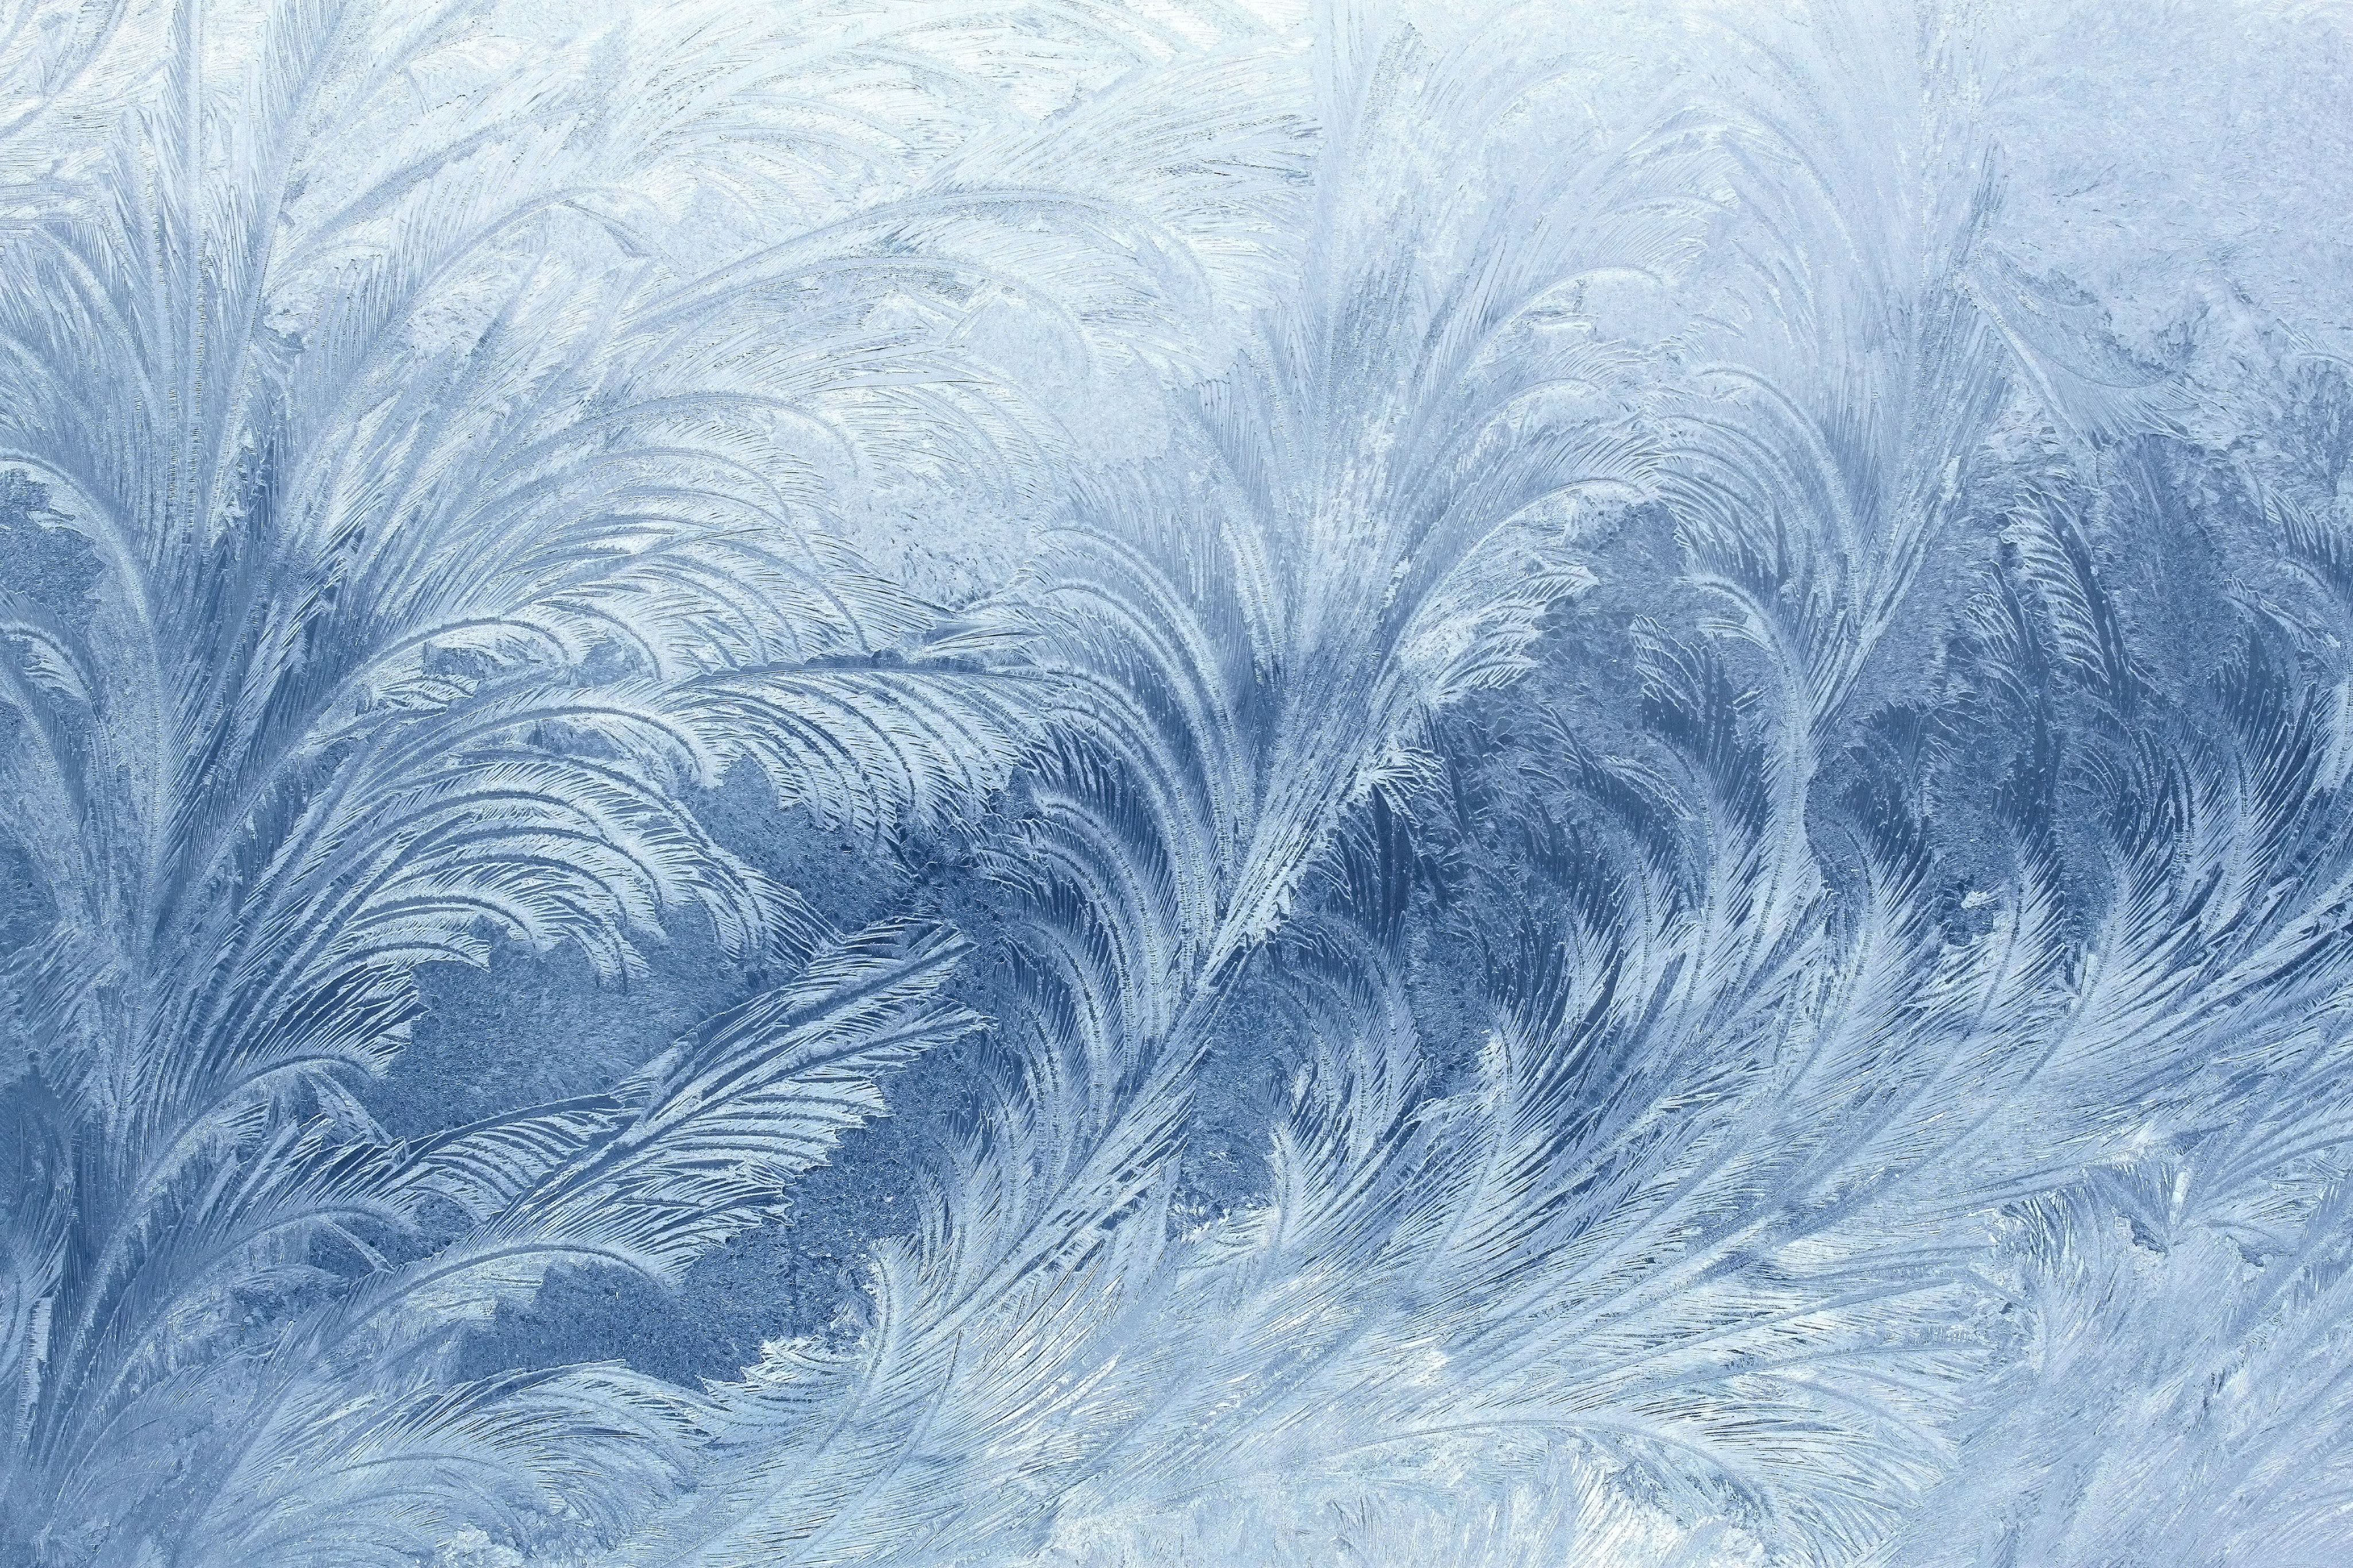 Texture beautiful ice patterns winter frost wallpaperx2733. Winter wallpaper, Waves wallpaper, Textured background